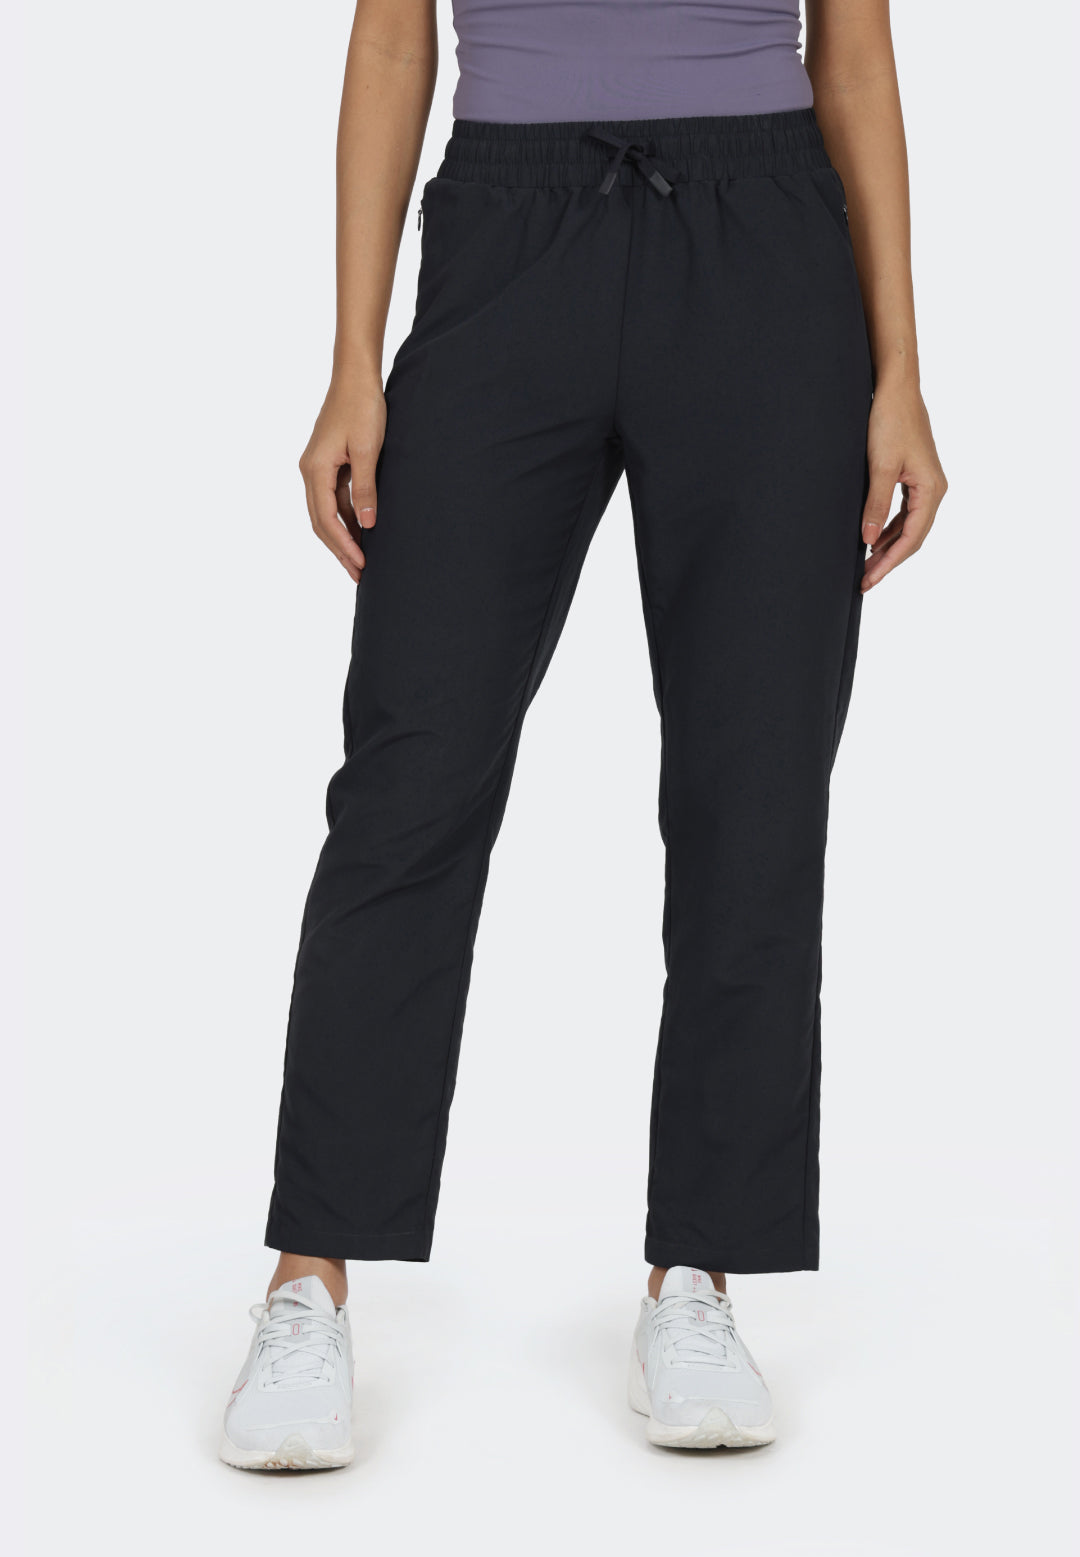 Buy Gym Track Pants for Women Online from Blissclub